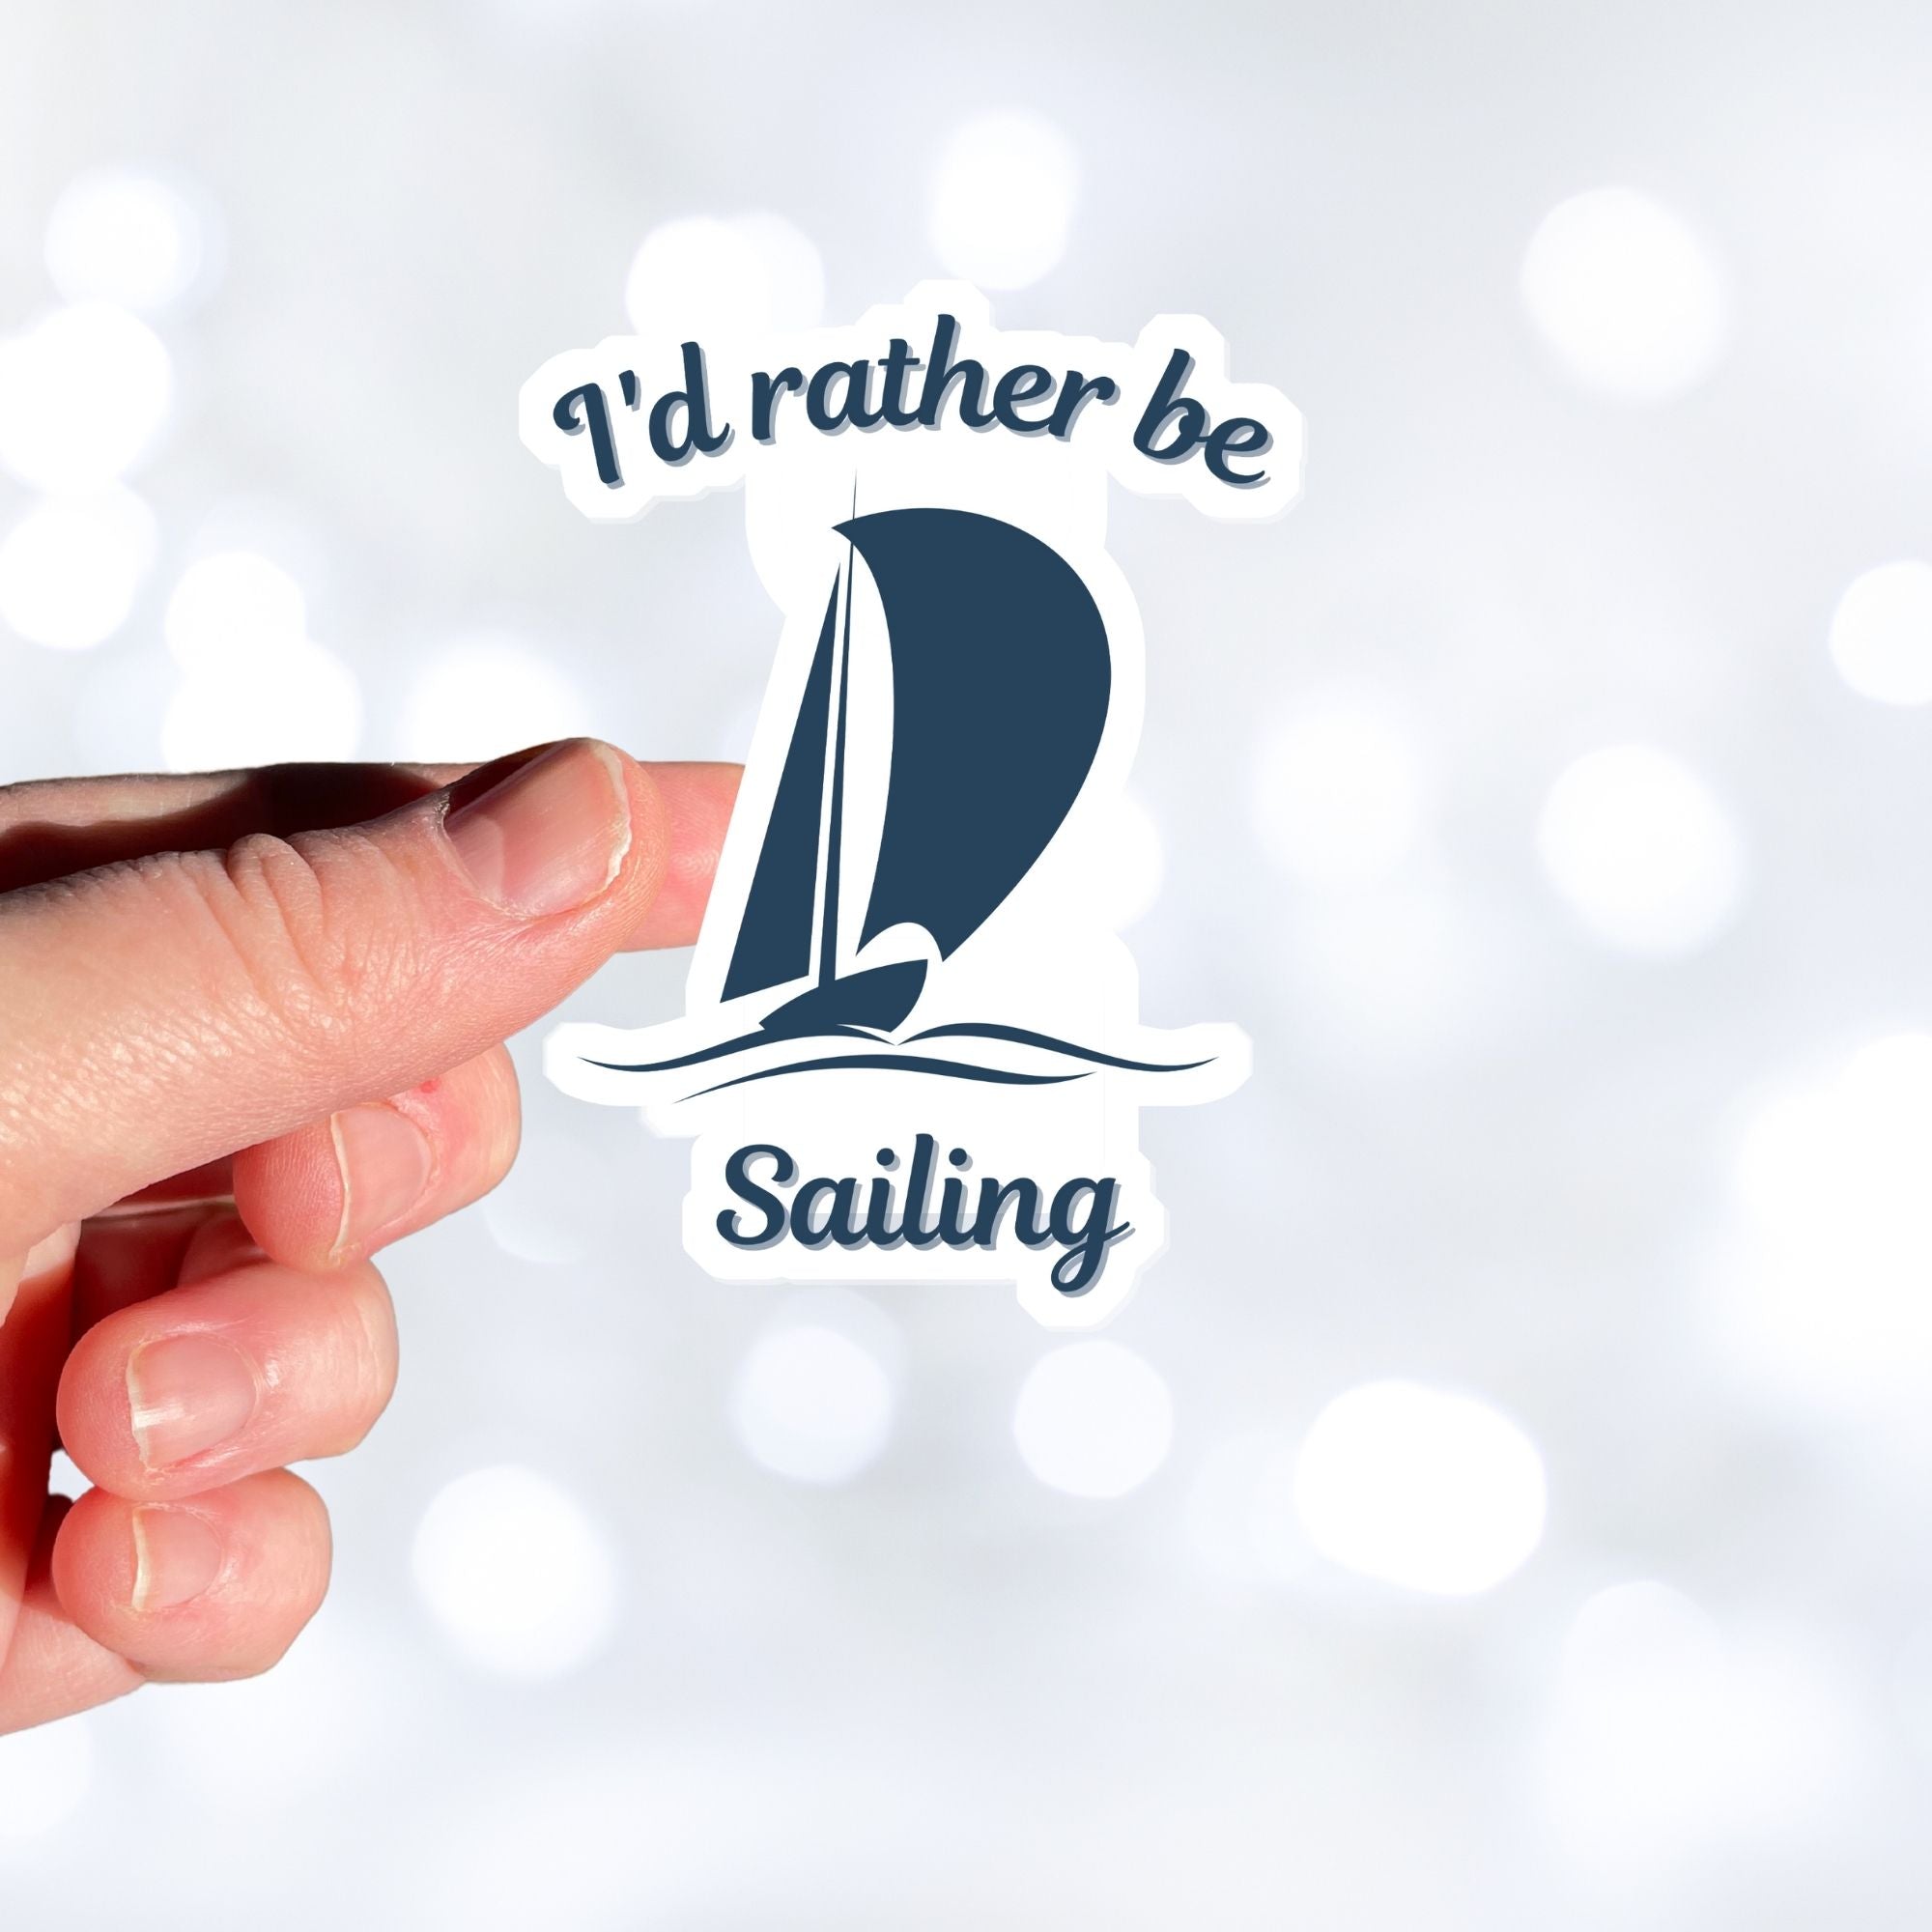 This individual die-cut sticker is great for anyone who loves to sail! It features a blue sailboat with the words "I'd rather be Sailing". This sailing sticker is understated, but says a lot! This image shows a hand holding the I'd rather be Sailing sticker.